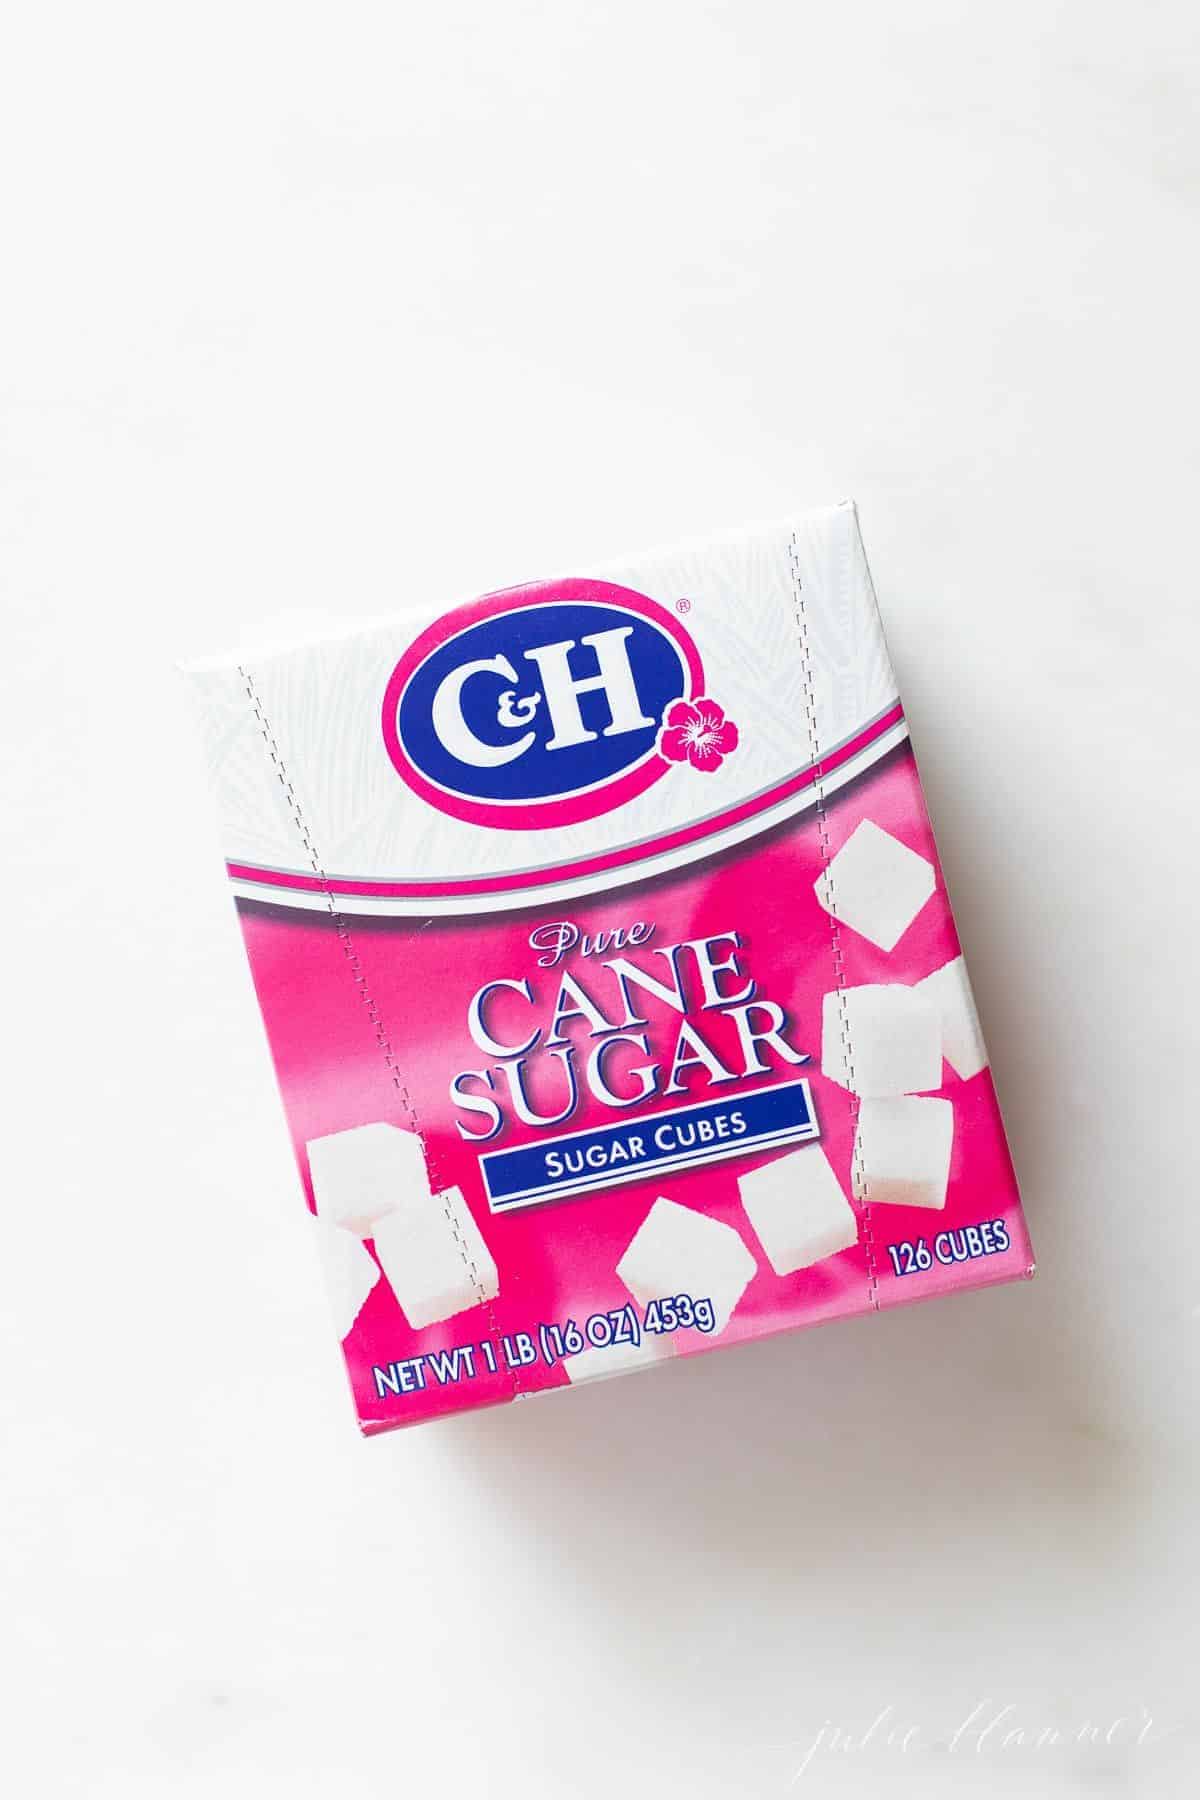 A box of cane sugar cubes on a white surface.